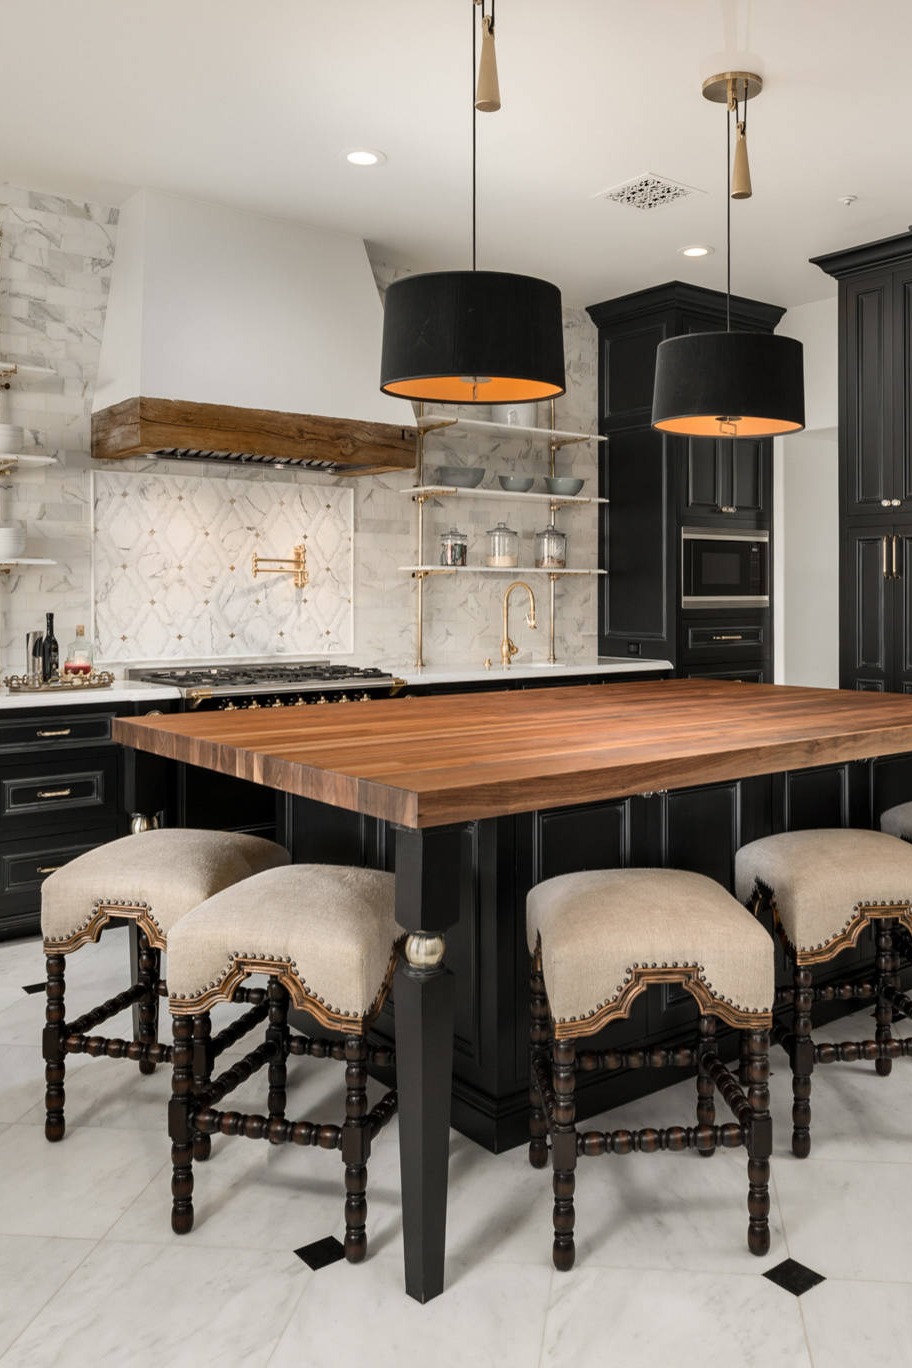 Dark Black Cabinets Cooking Space Kitchen Island Black Kitchen Style Marble Countertop Small Kitchen Wall